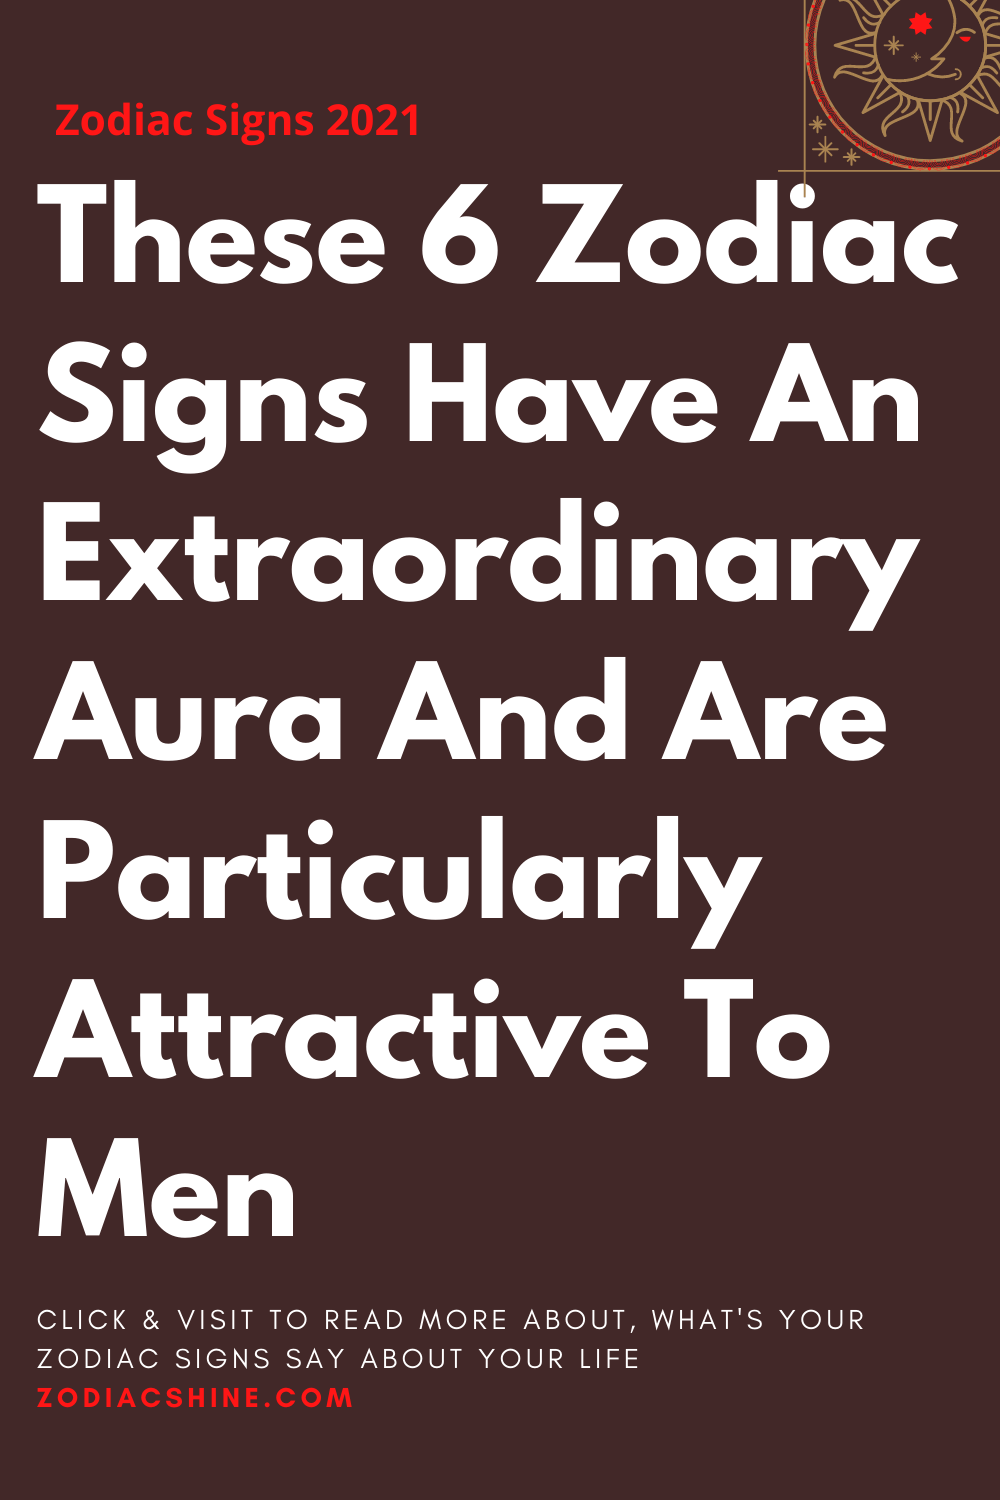 These 6 Zodiac Signs Have An Extraordinary Aura And Are Particularly Attractive To Men